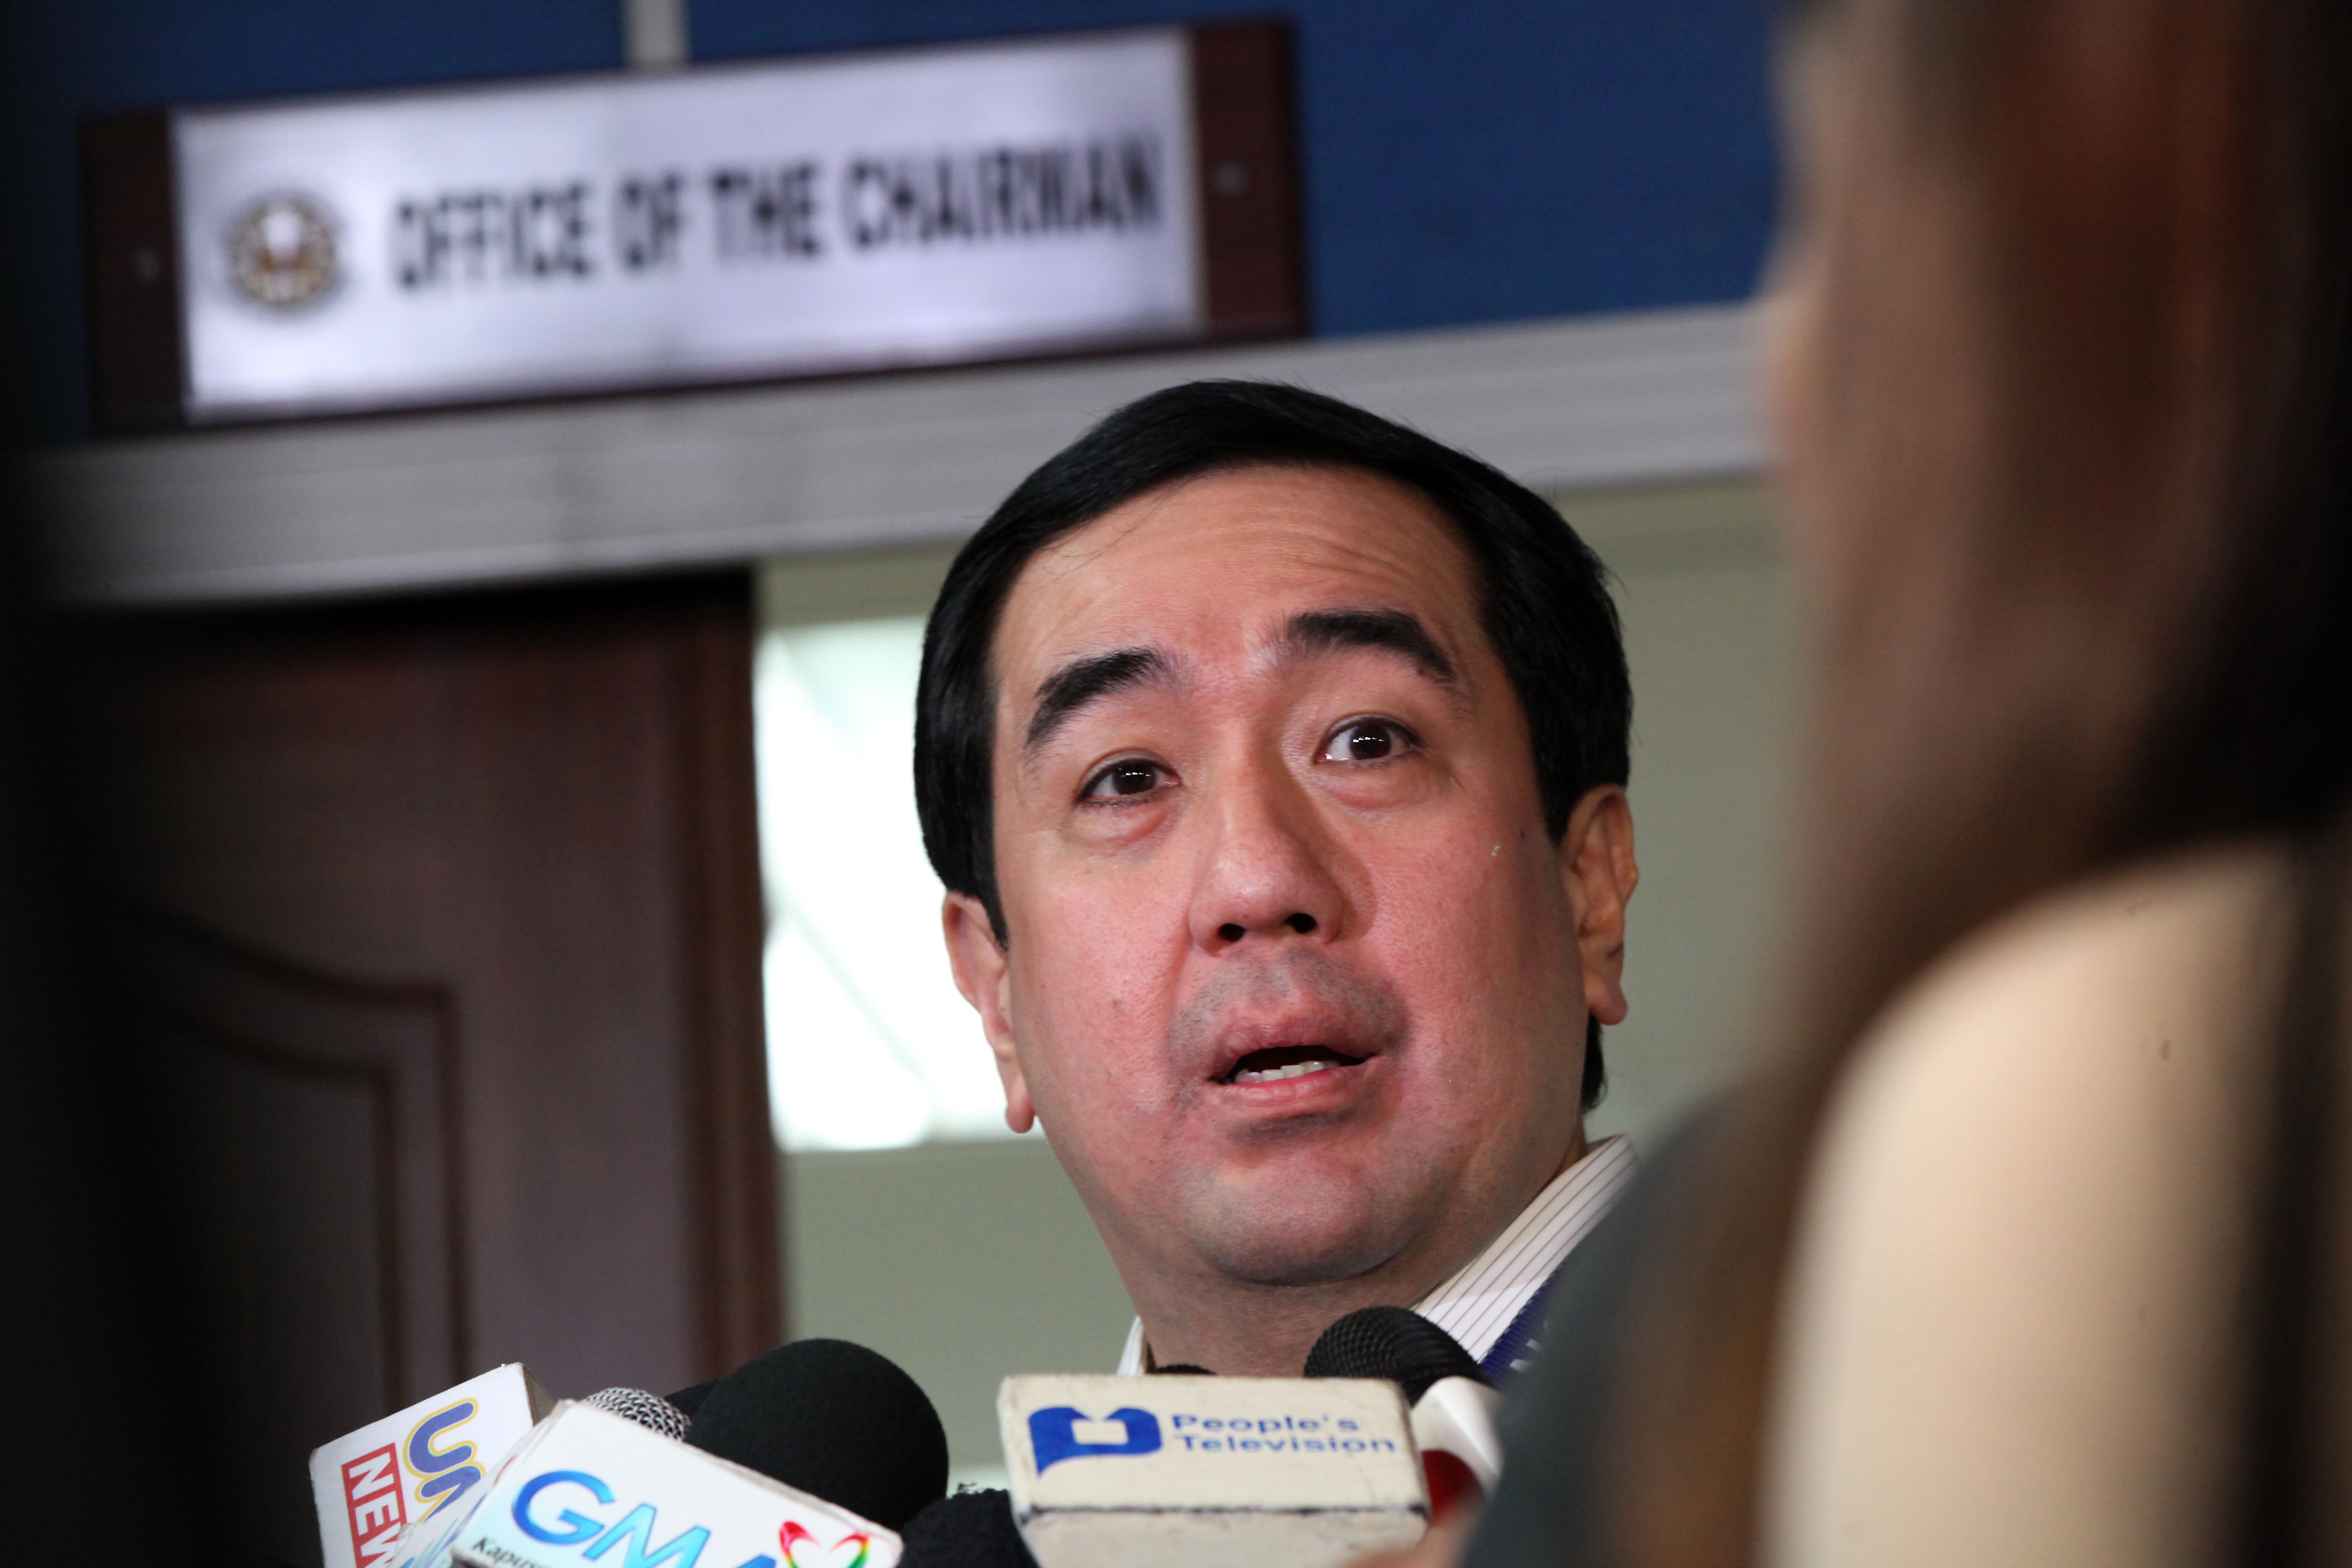 COMELEC CHAIR. Andres Bautista, chair of the Commission on Elections, faces allegations of unexplained wealth from his own wife. Photo by Ben Nabong/Rappler  